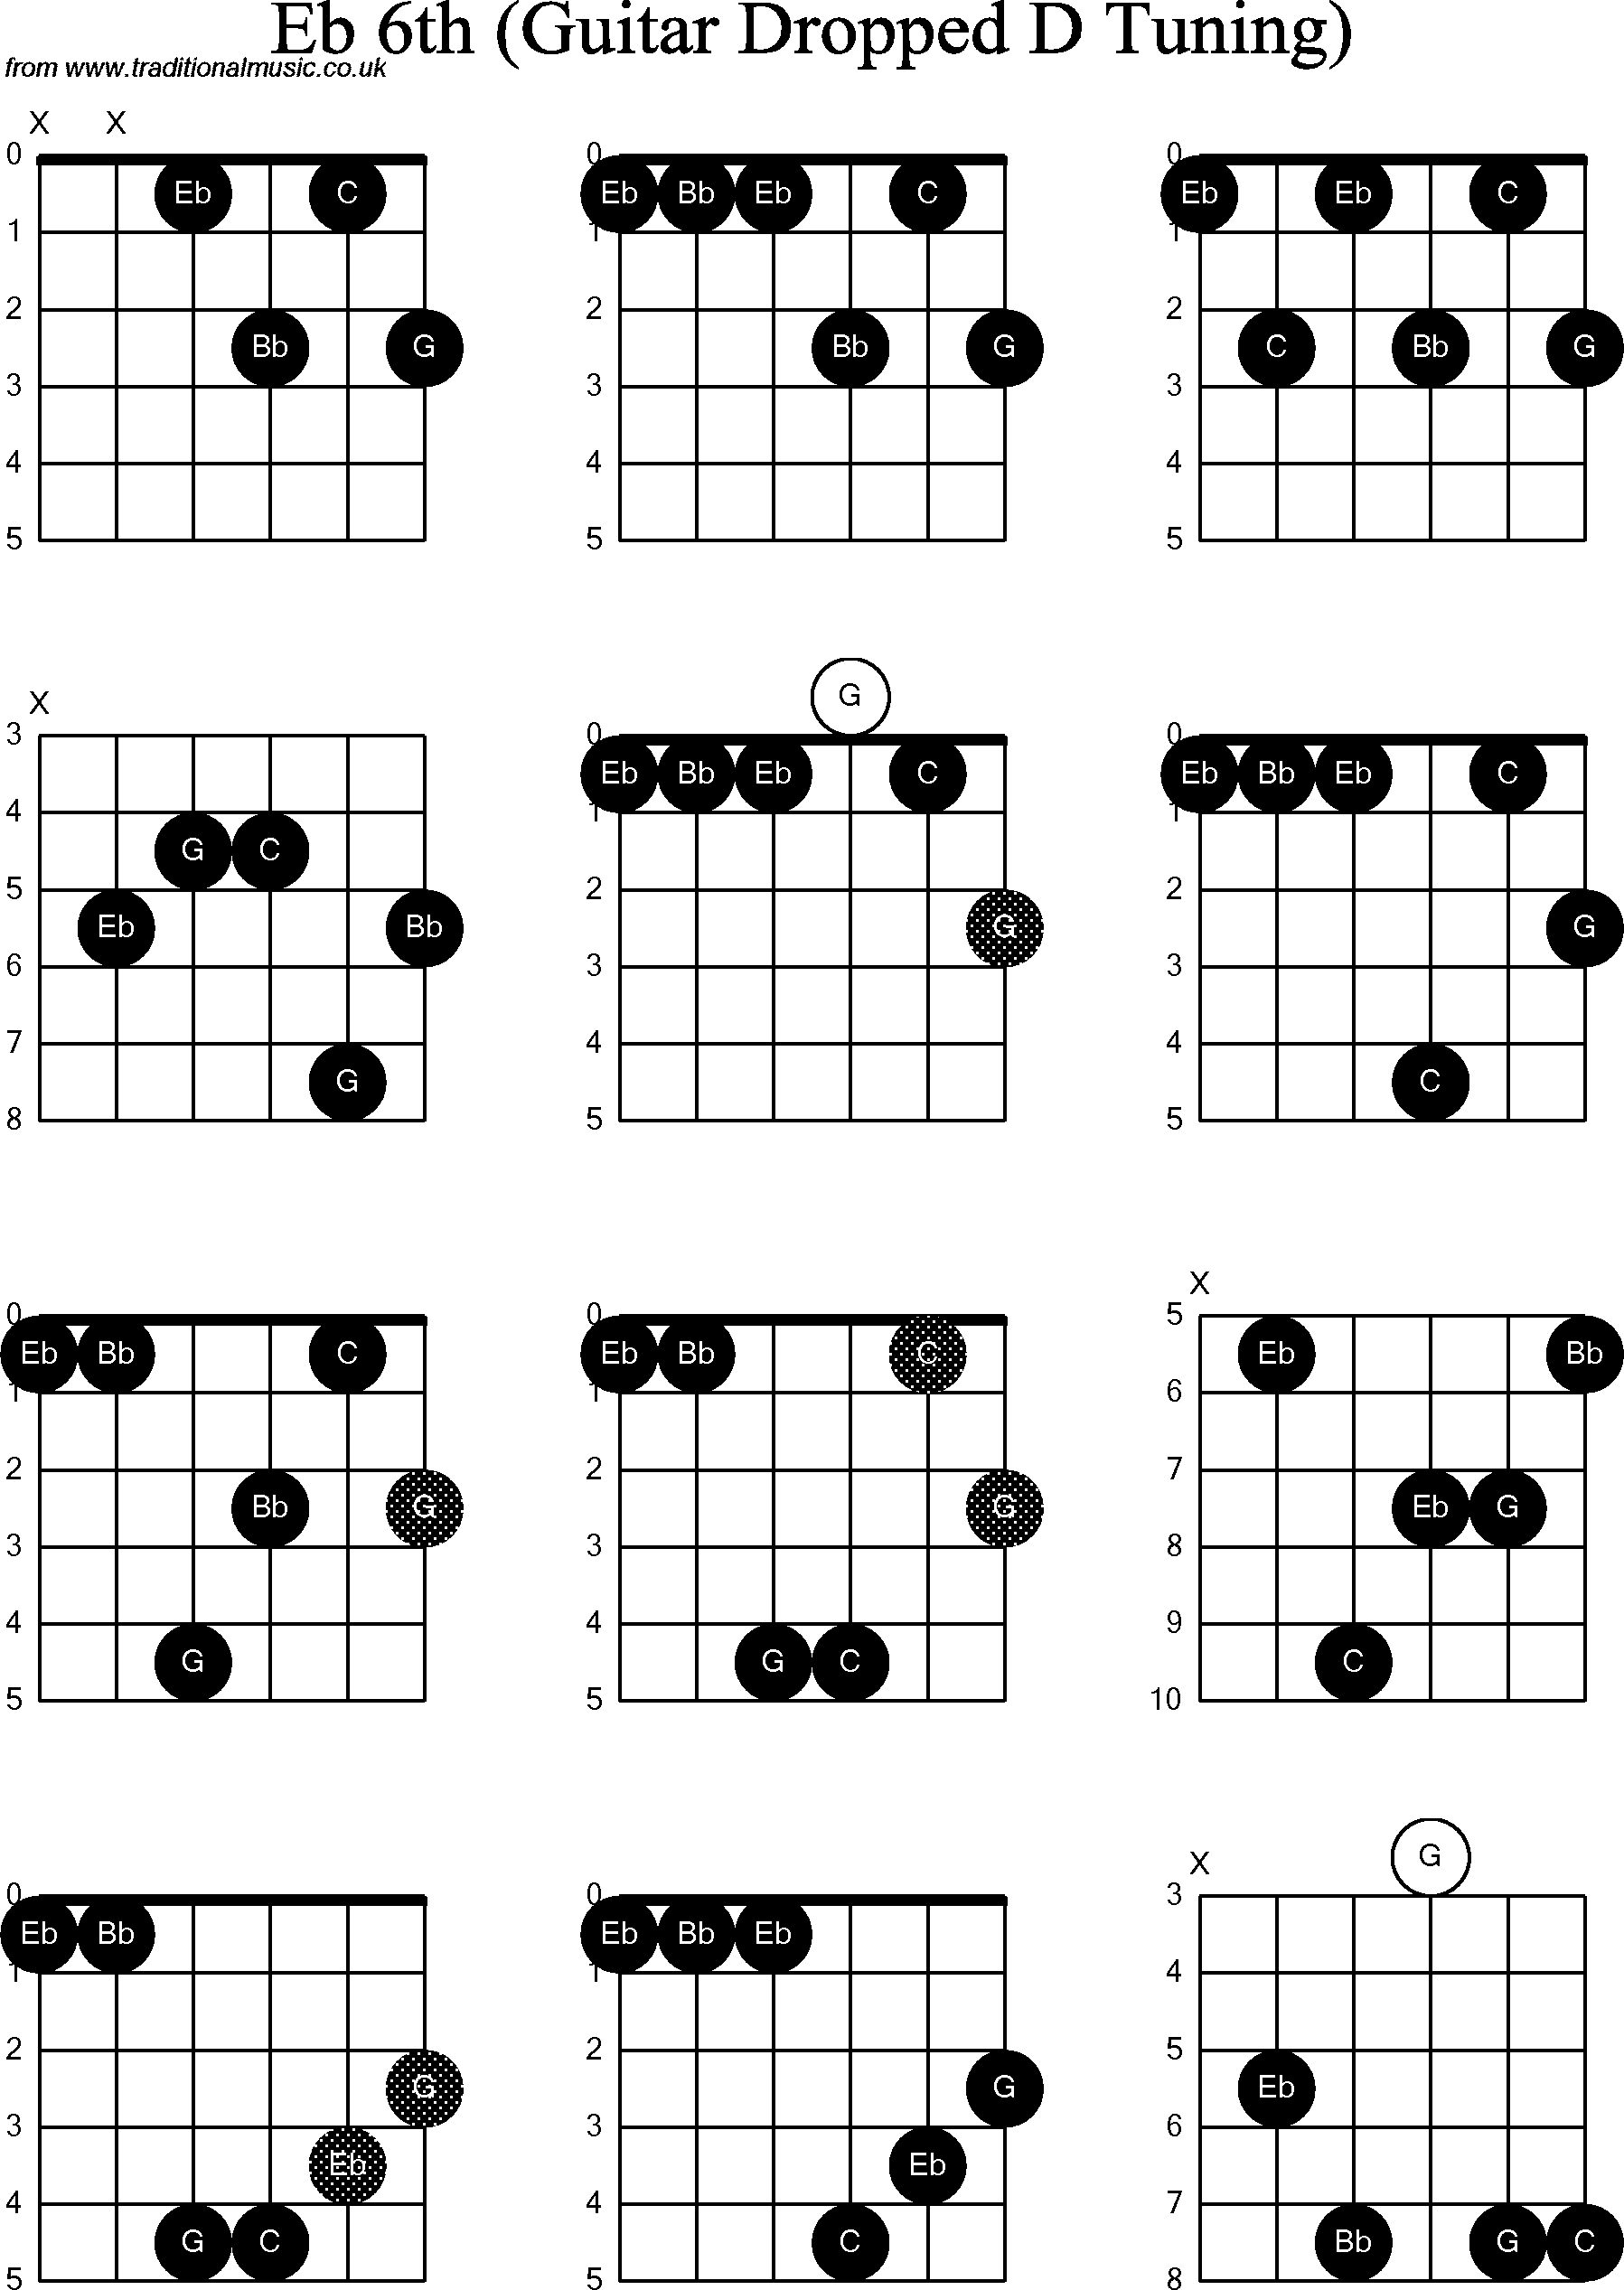 Chord diagrams for dropped D Guitar(DADGBE), Eb6th